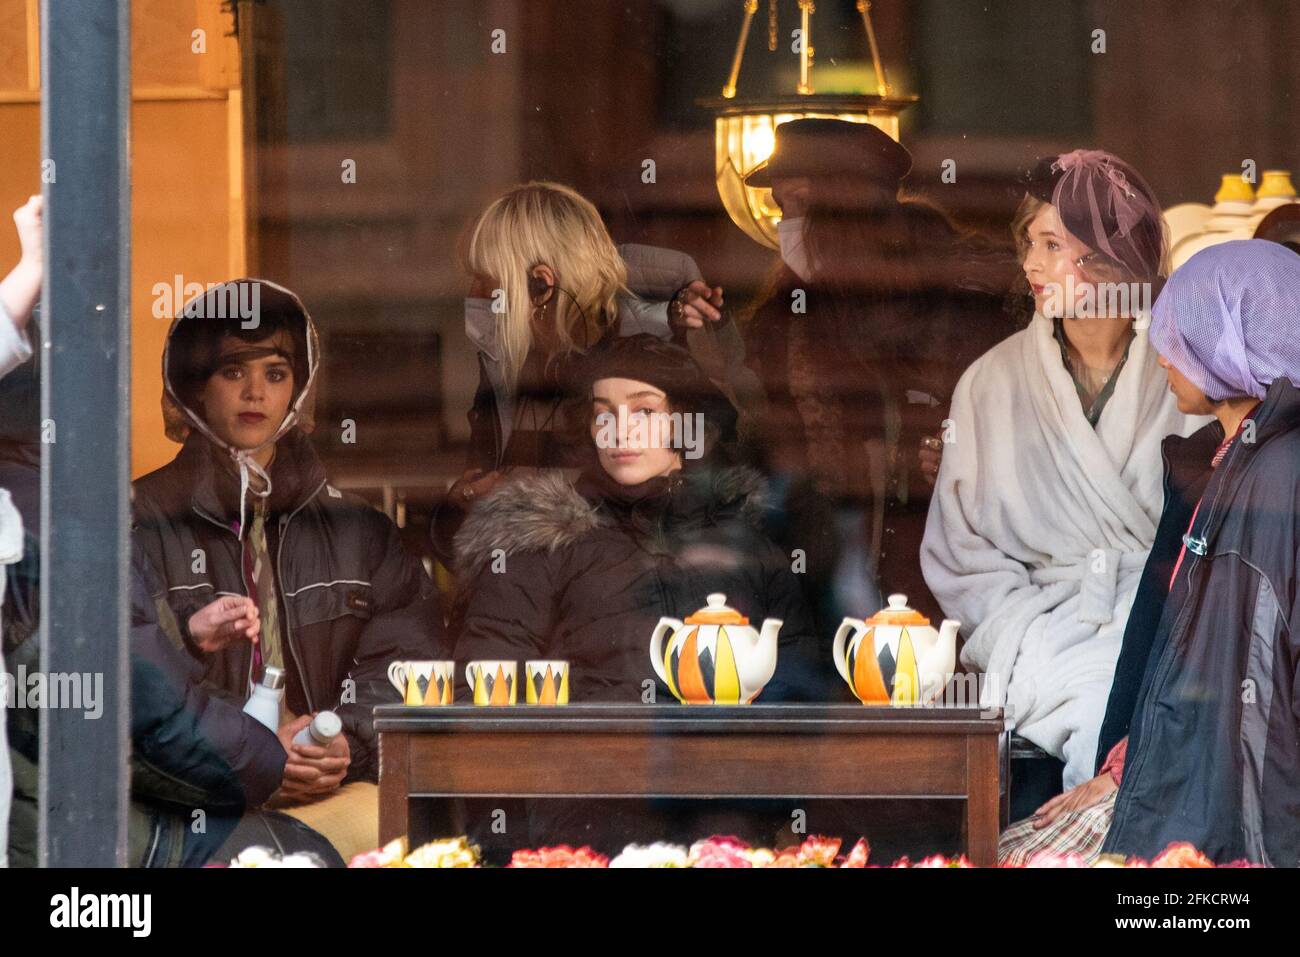 Birmingham, UK. 30th April 2021: Star of Netflix series Bridgerton, Phoebe Dynevor, was today seen on set of upcoming drama series for Sky, The Colour Room. Credit: Ryan Underwood / Alamy Live News Stock Photo